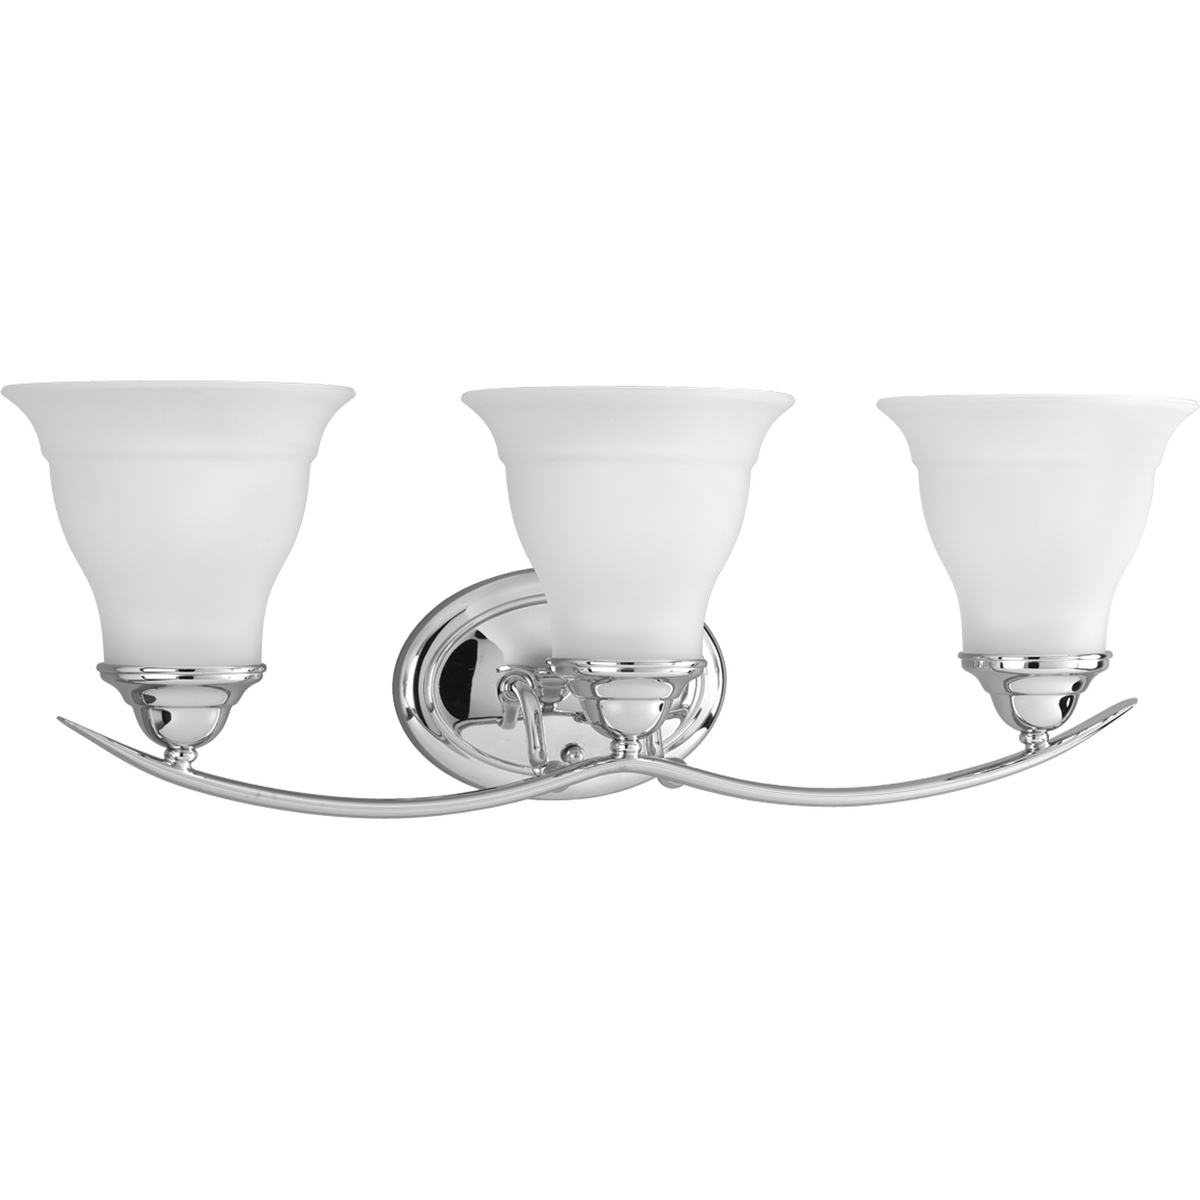 Three-light bath fixture featuring soft angles, curving lines and etched glass shades that mount up or down. Gracefully exotic, the Trinity Collection offers classic sophistication for transitional interiors. Sculptural forms of metal and glass are enhanced by a classic finish. This transitional style can transform a room or your whole home with its charming versatility. Polished Chrome finish.